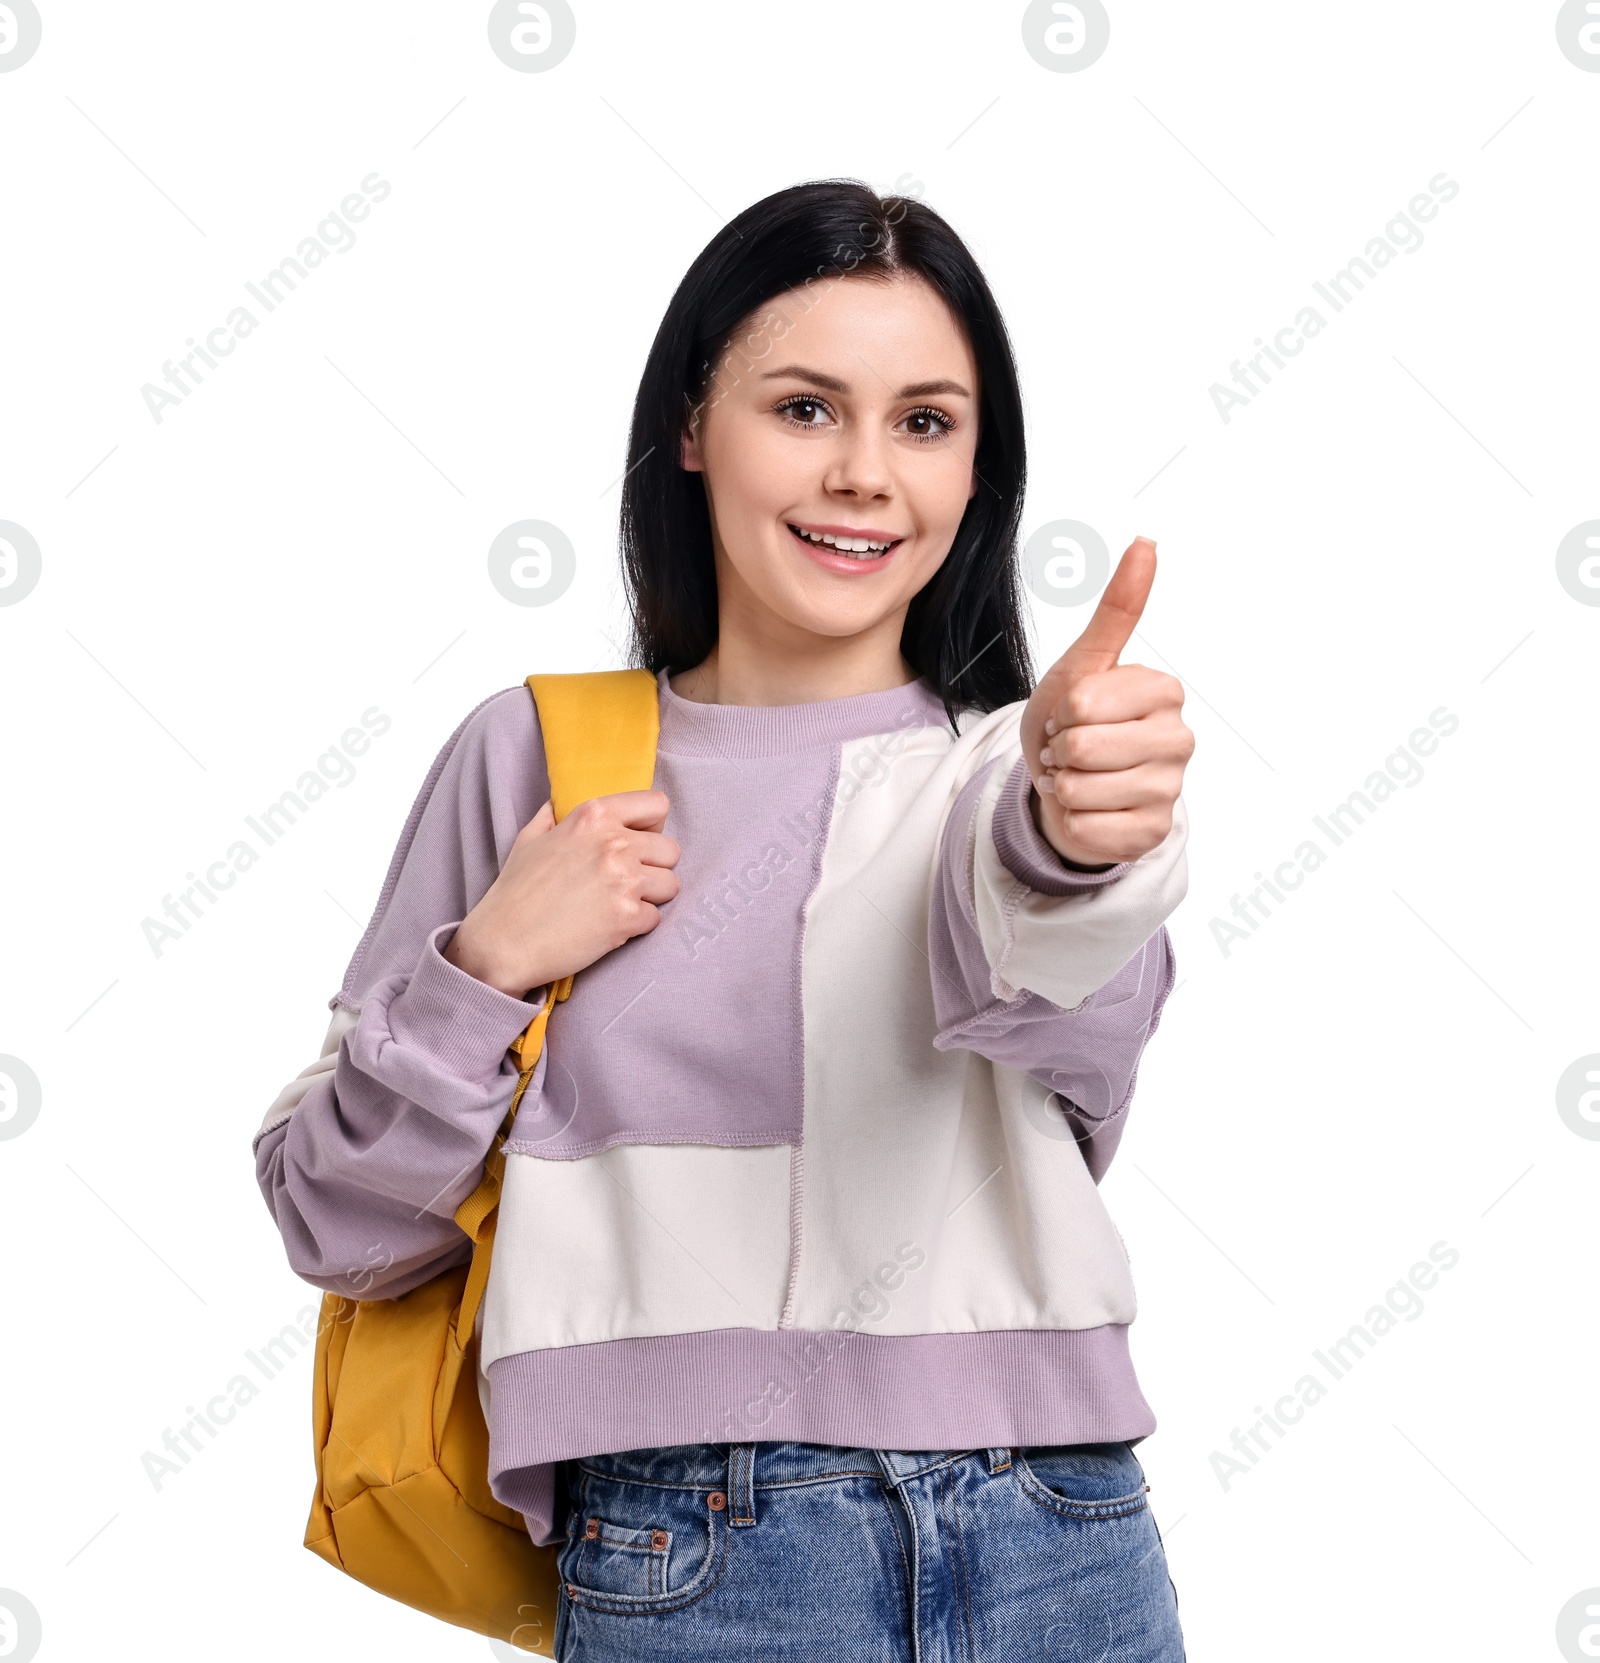 Photo of Smiling student with backpack showing thumb up on white background